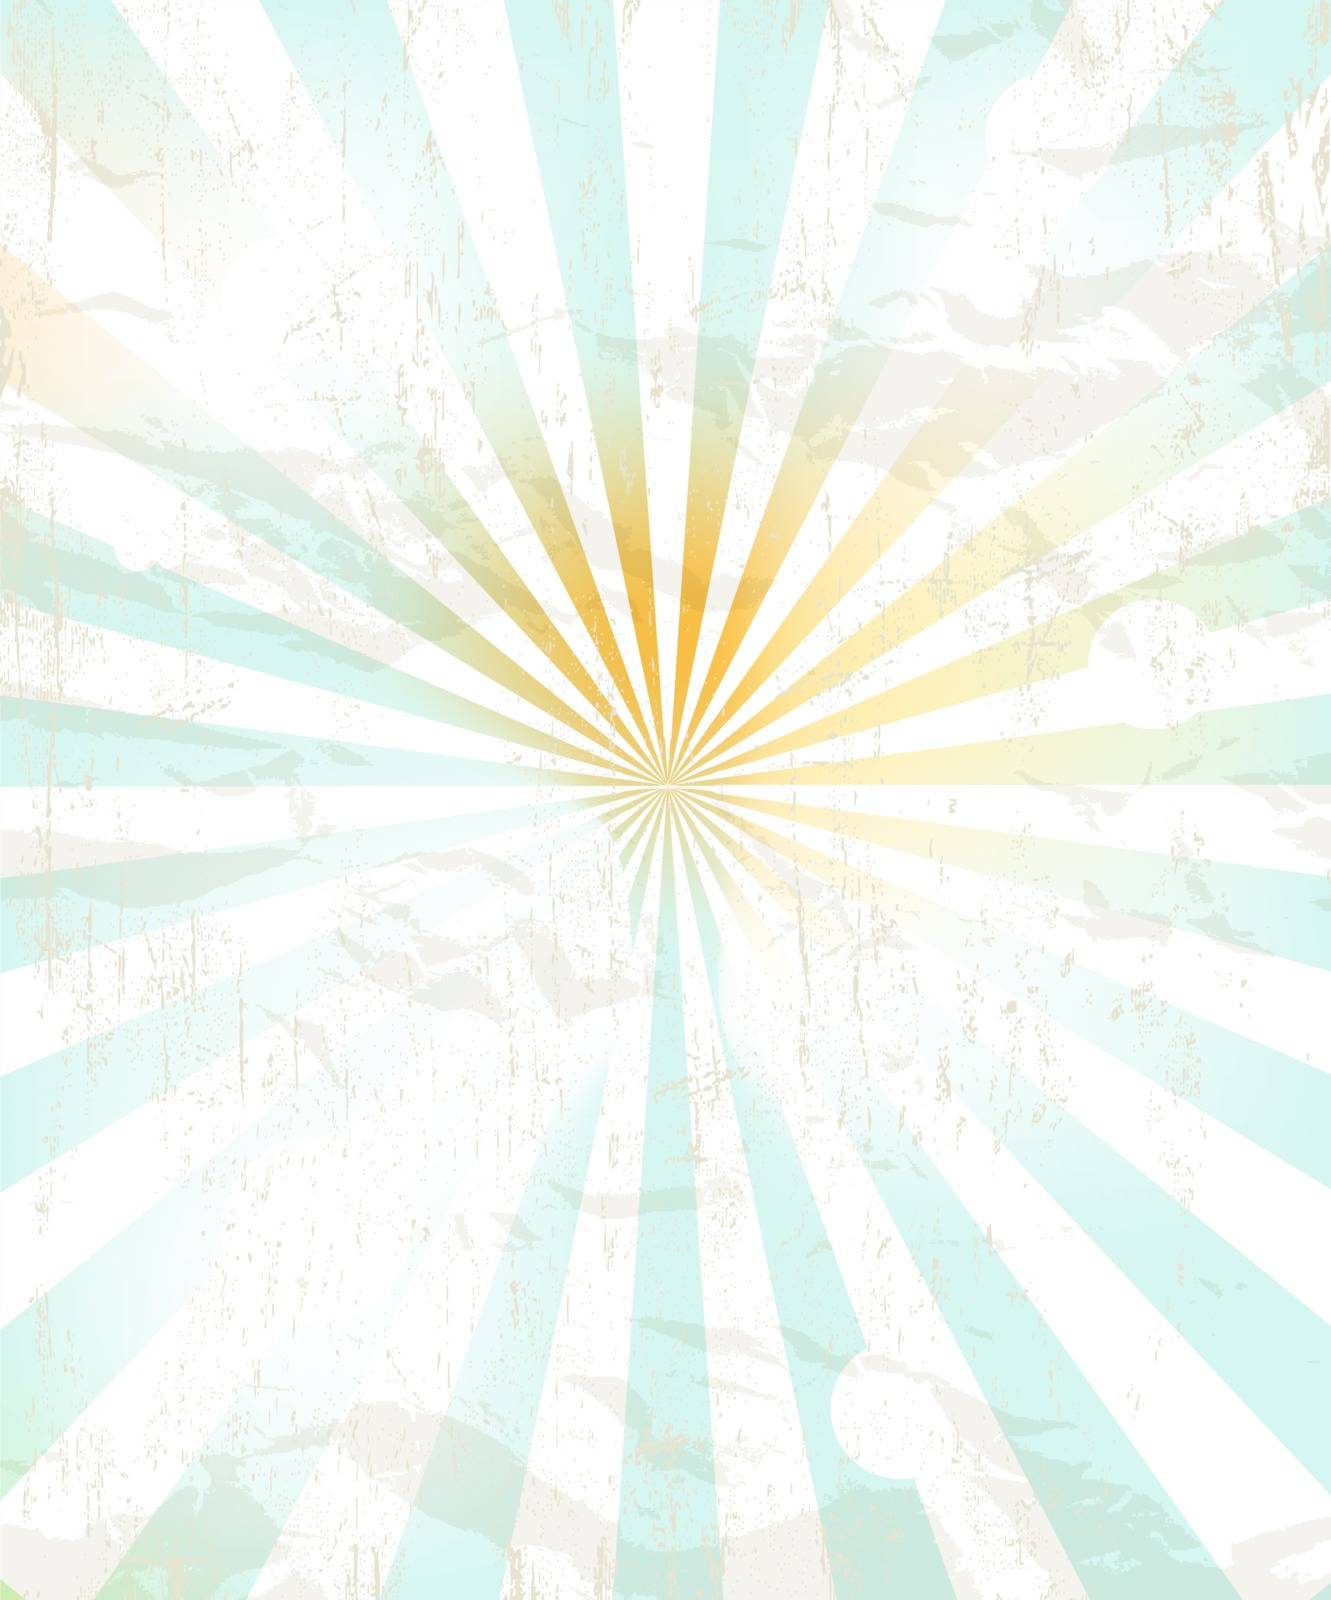 Abstract sunny  vintage background. Vector illustration EPS10